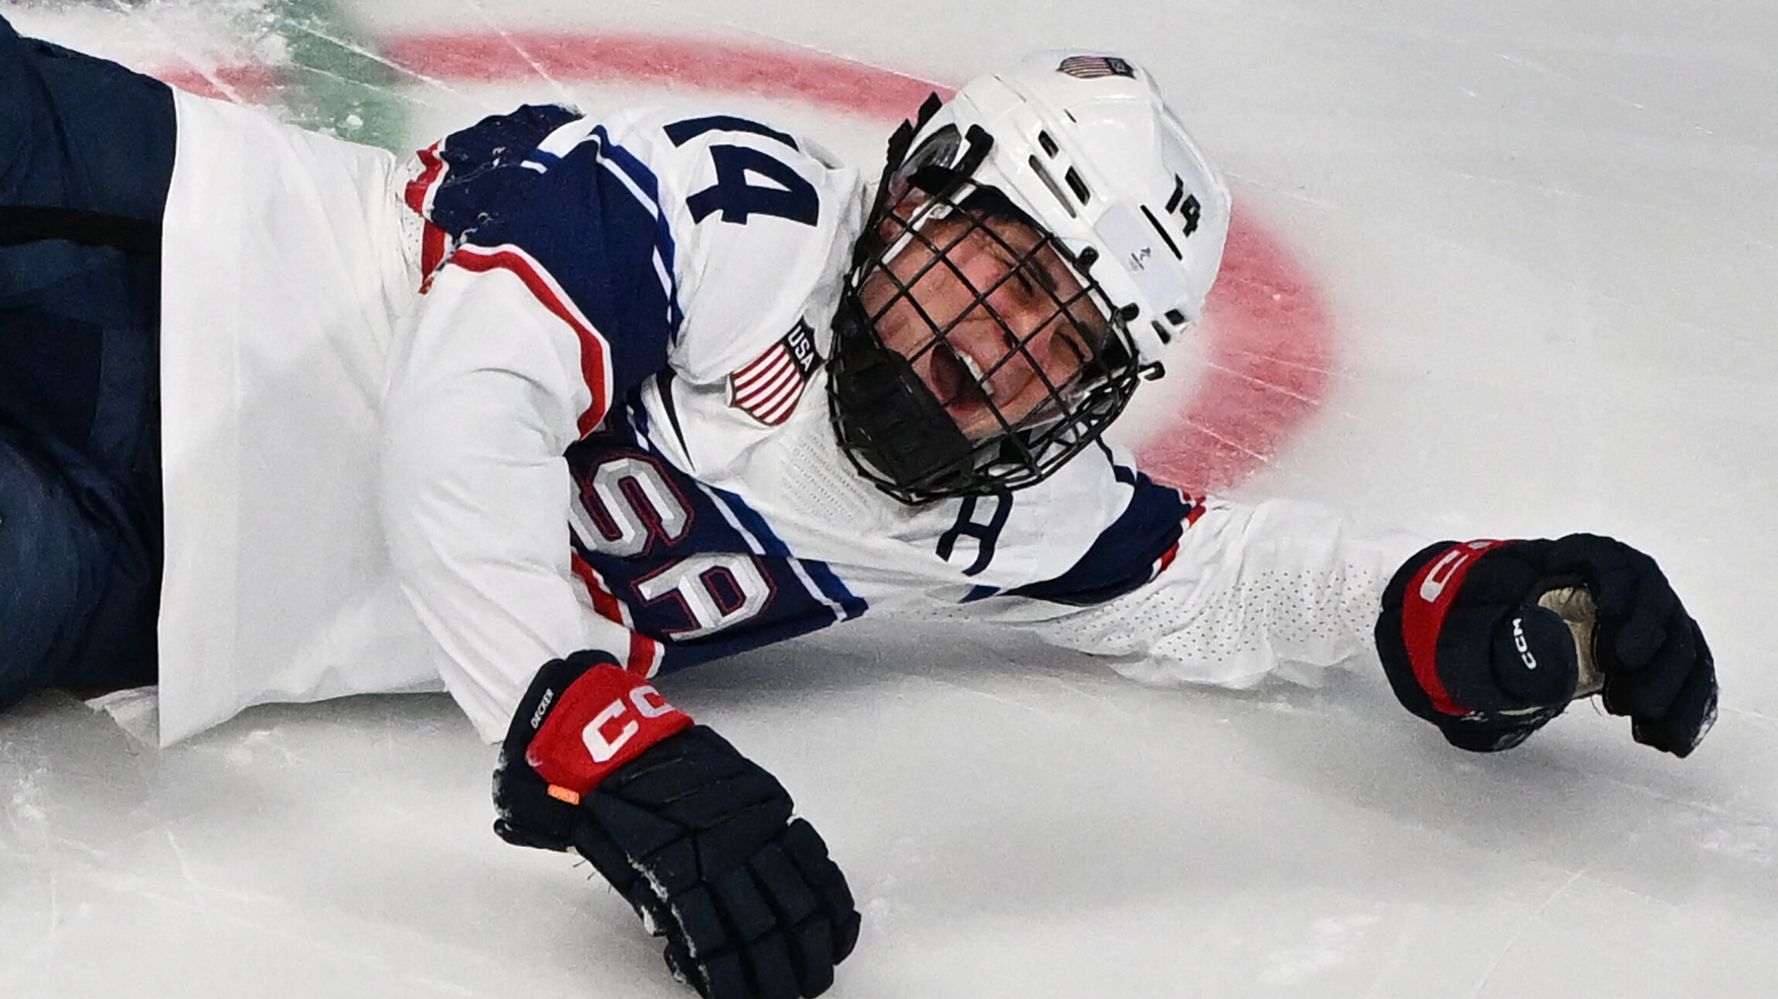 Decker hurt in defending champion USA's win over Finland at Winter